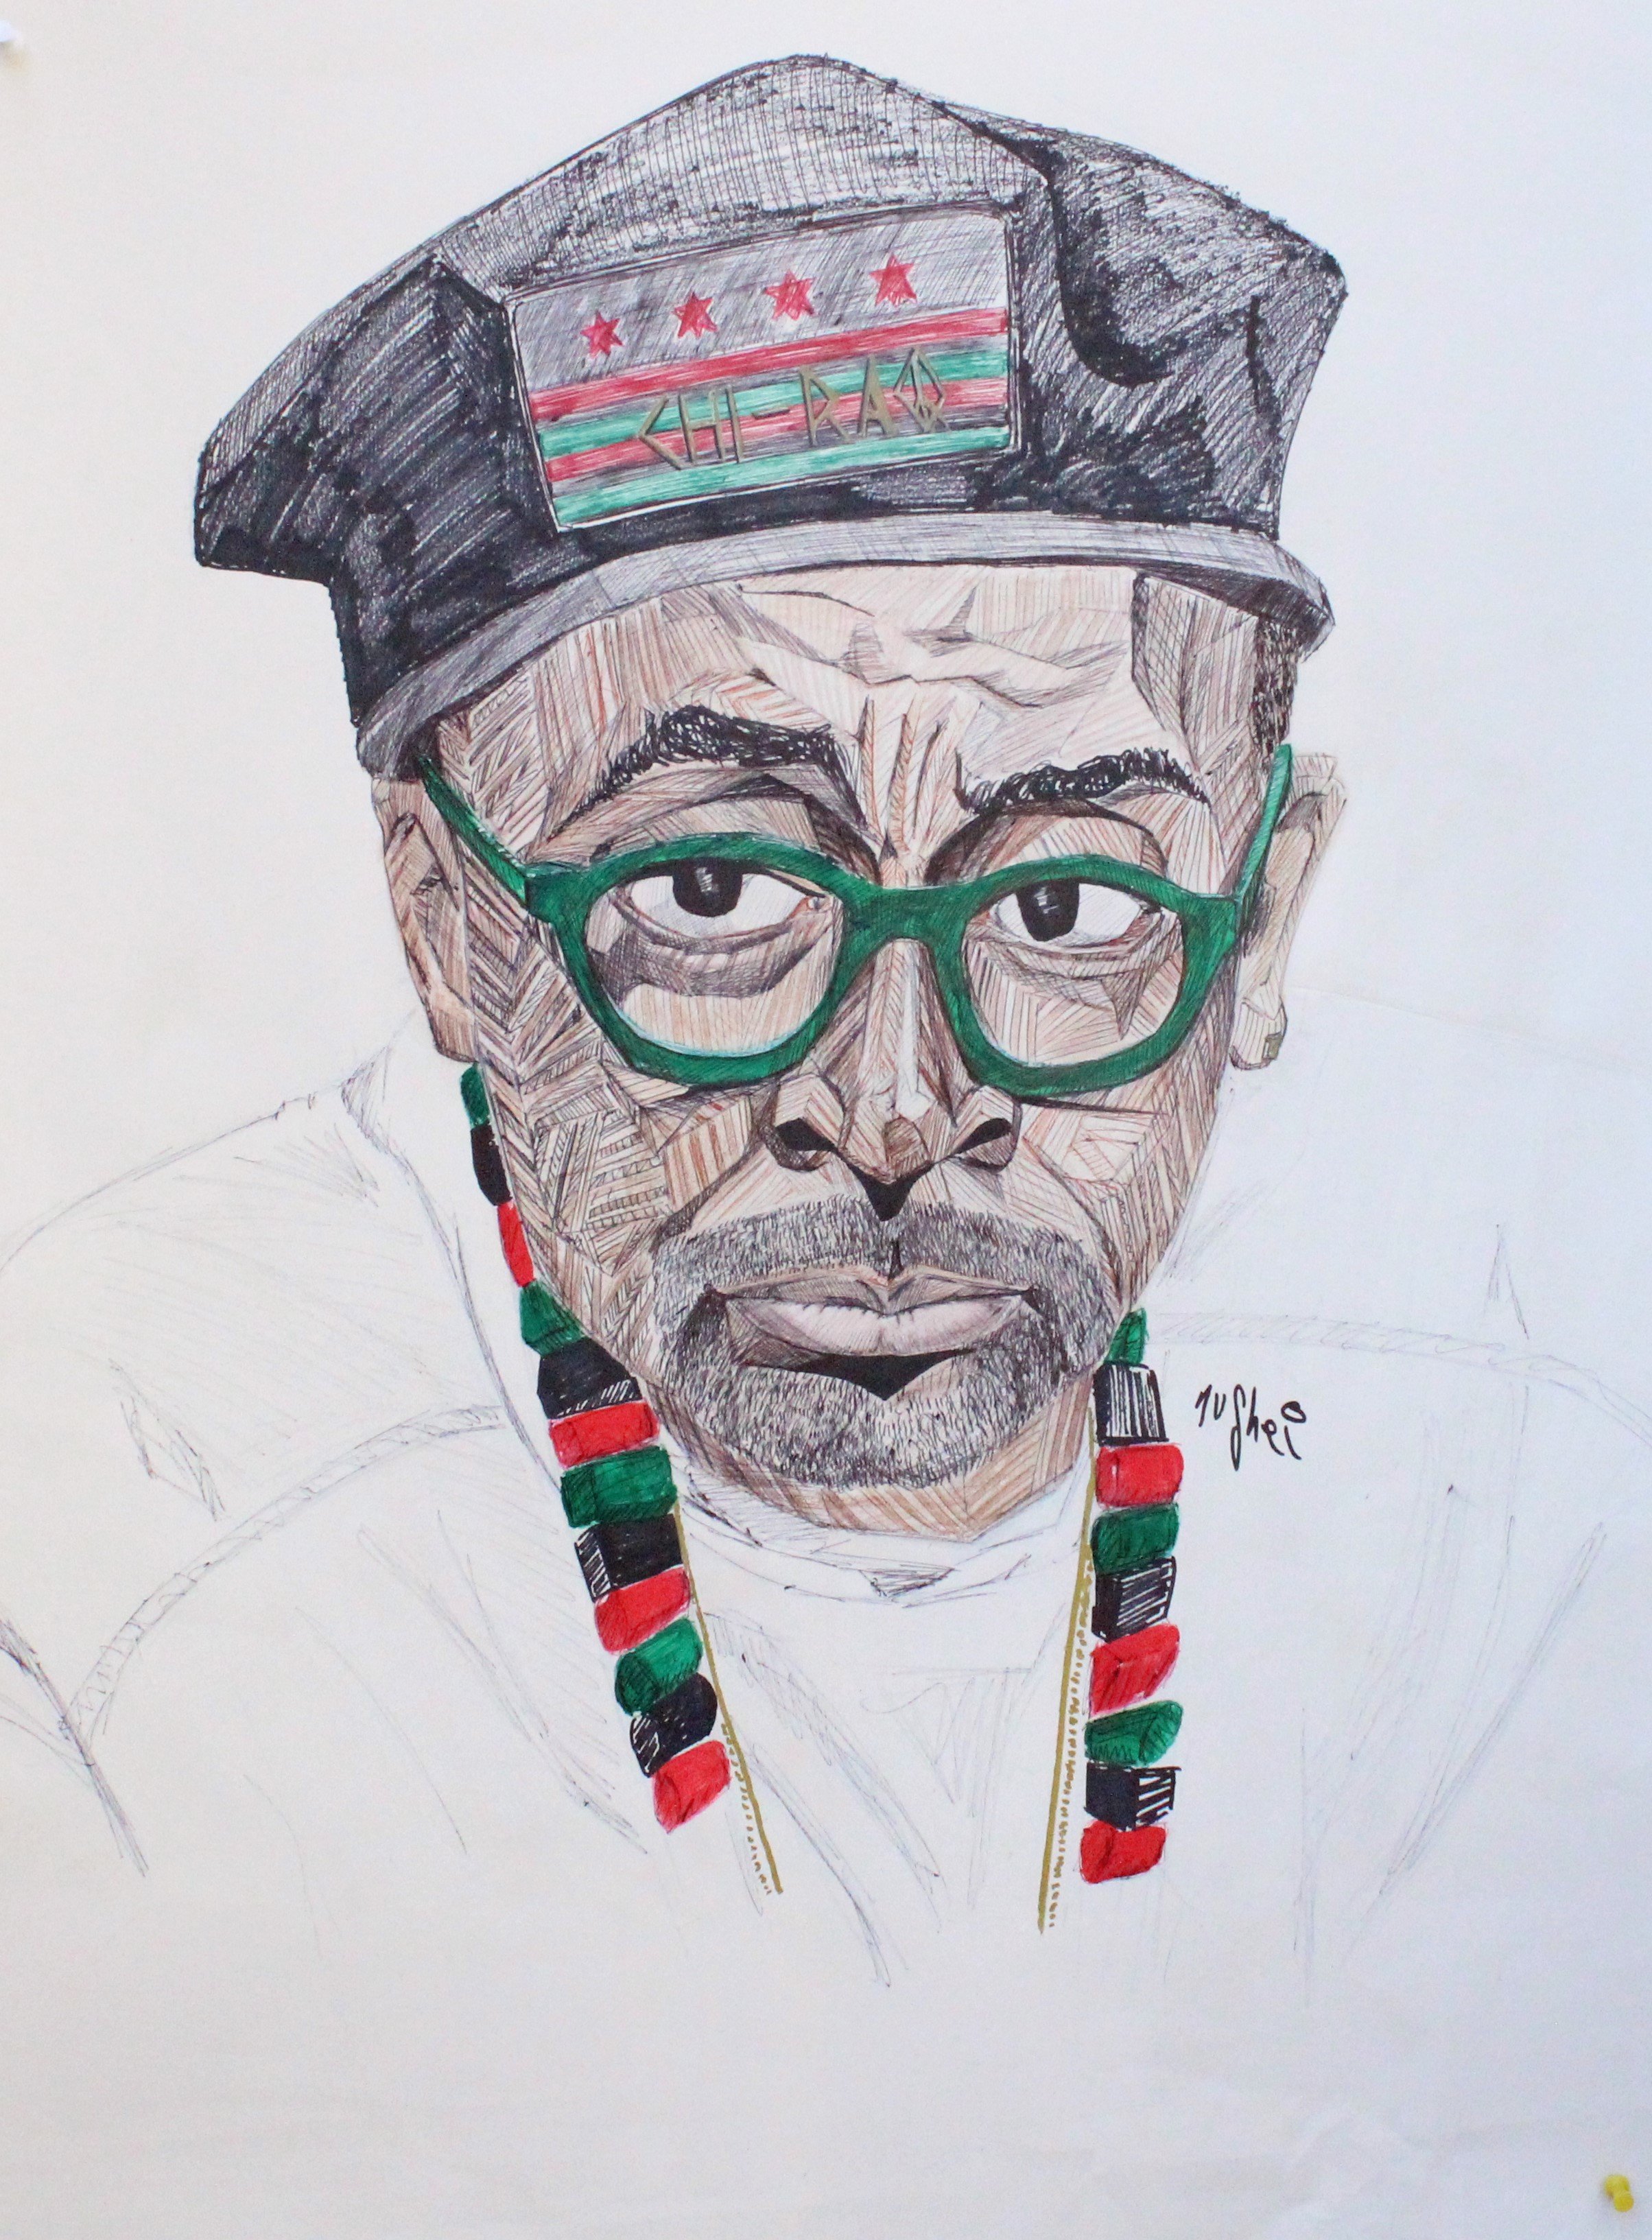 Nu Shei; Spike Lee, 2018, Original Drawing Other, 22.1 x 30.2 inches. Artwork description: 241 Spike Lee directed one of my favourite moviesMalcom X .Besides coming from the notorious streets of Brooklyn he has also became one of the most decorated Directors in Hollywood since with an amazing filmography list.Homage piece. ...